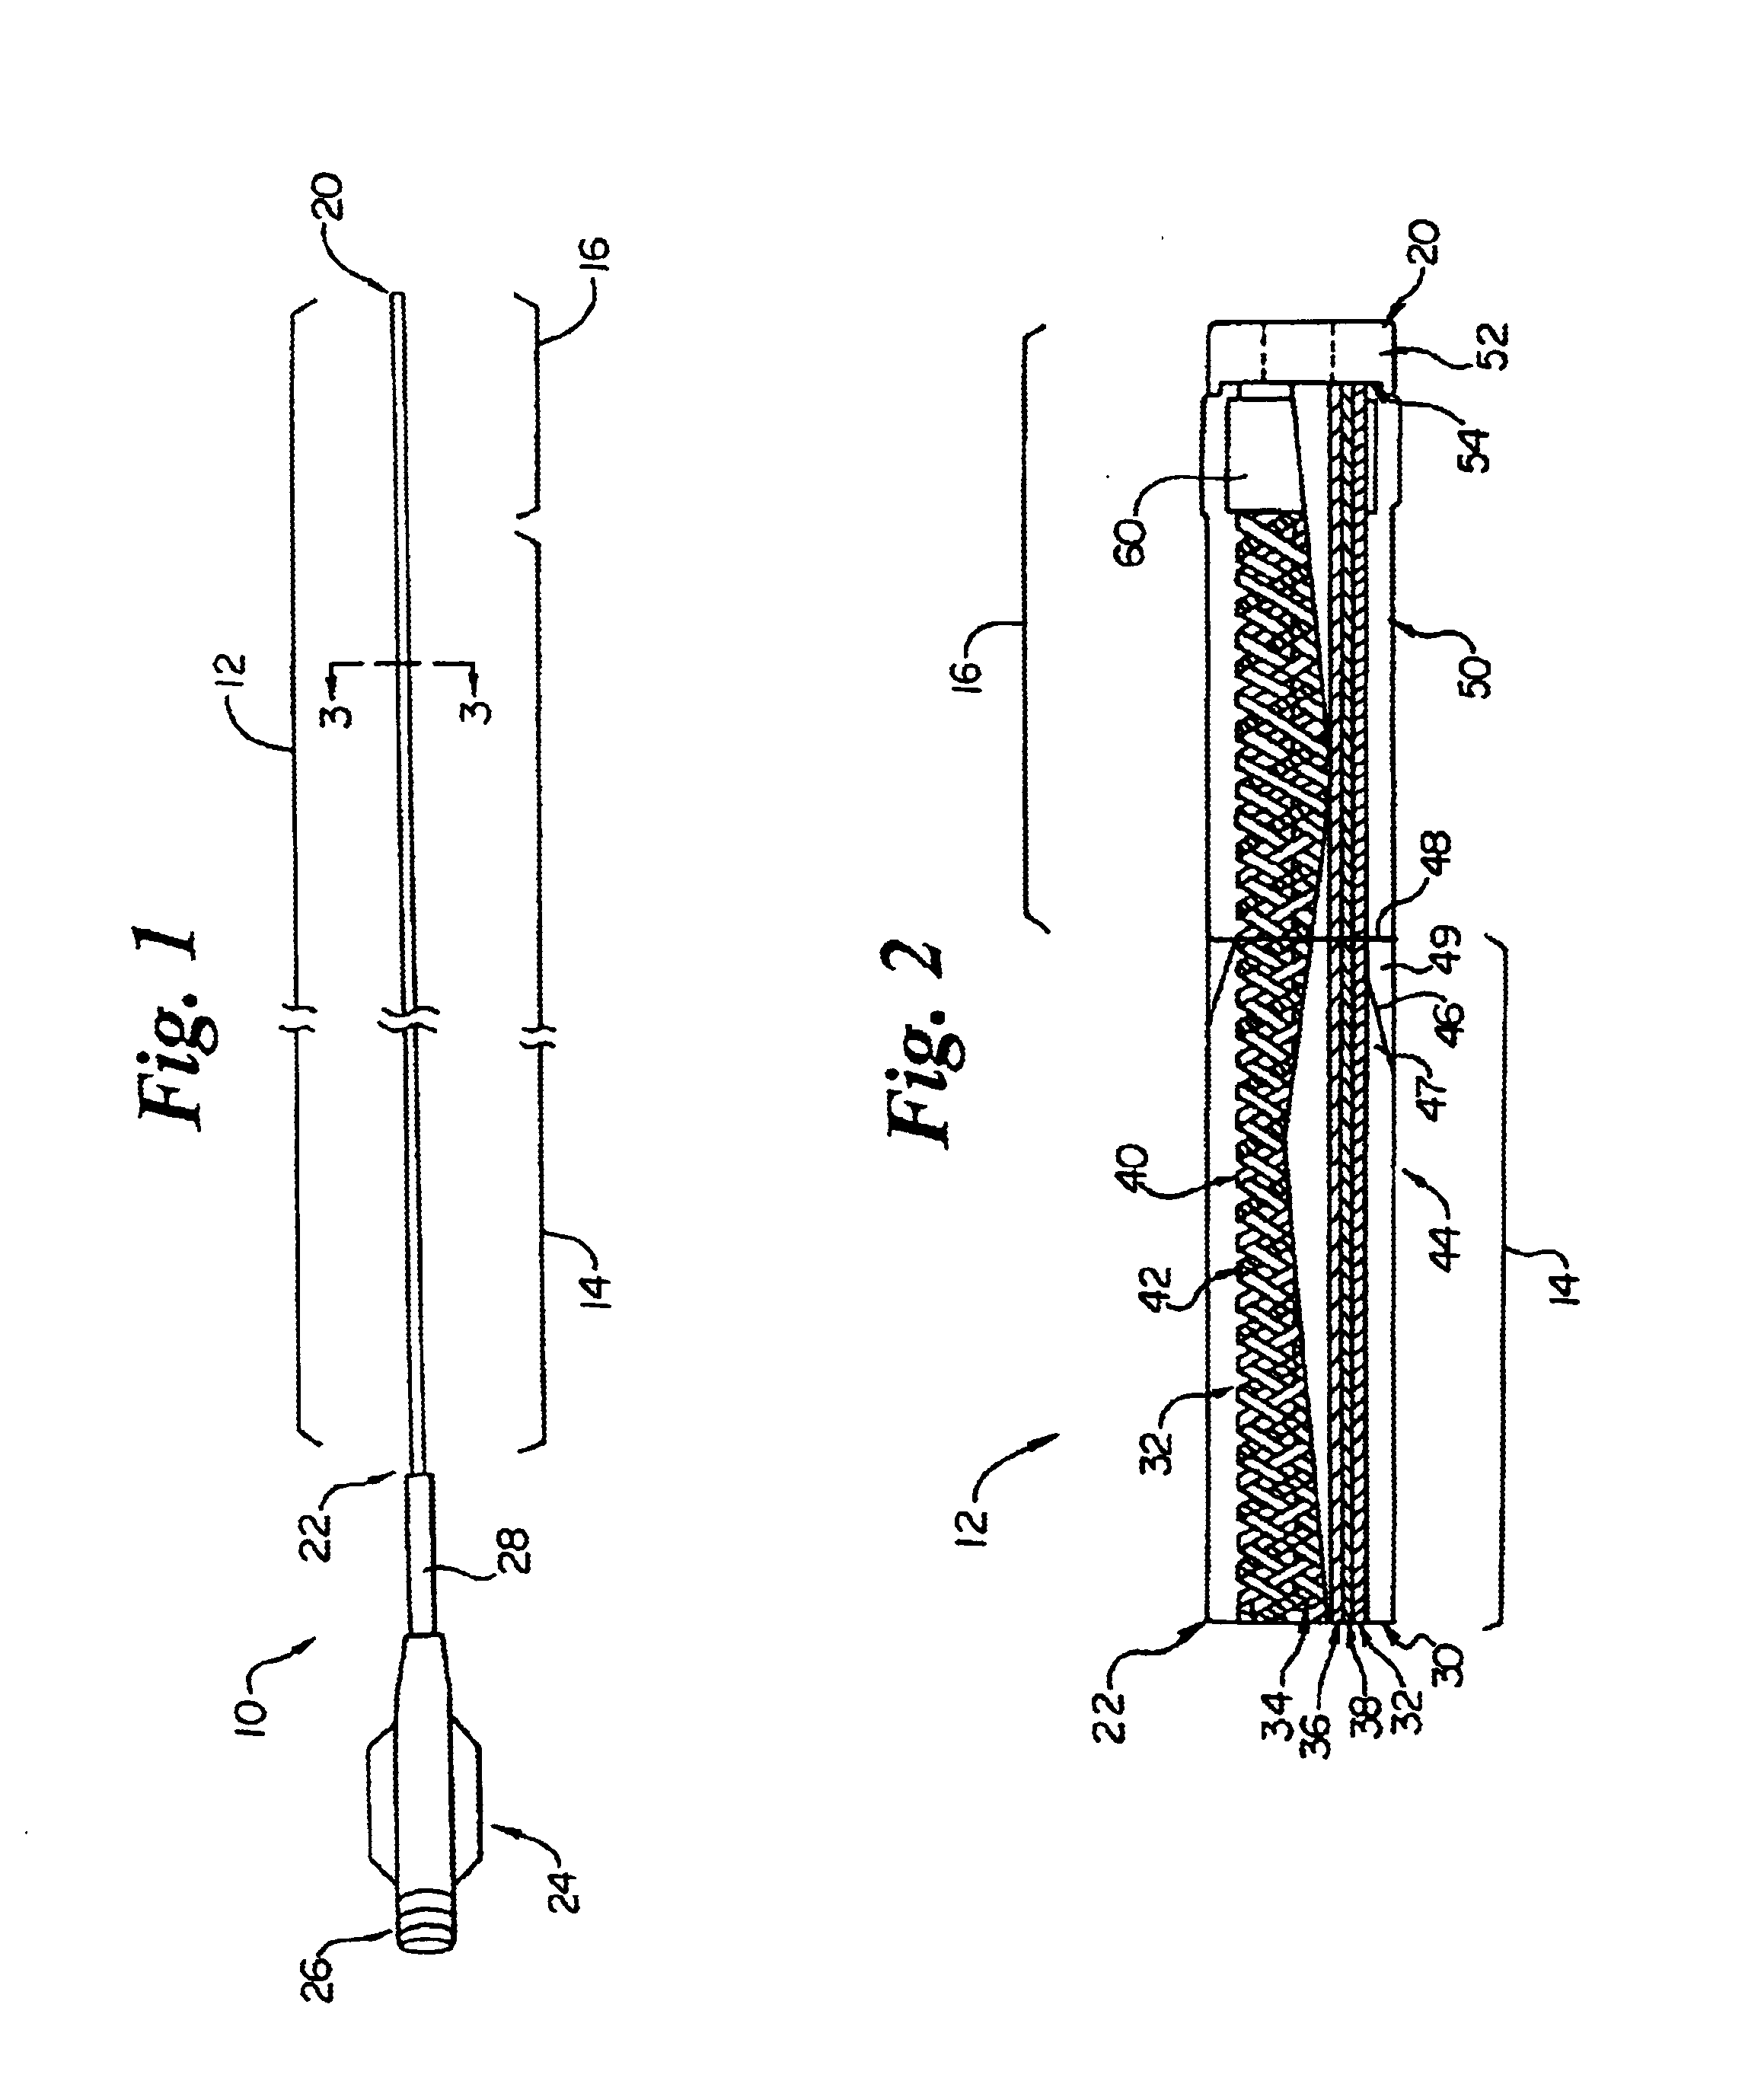 Intravascular catheter with composite reinforcement